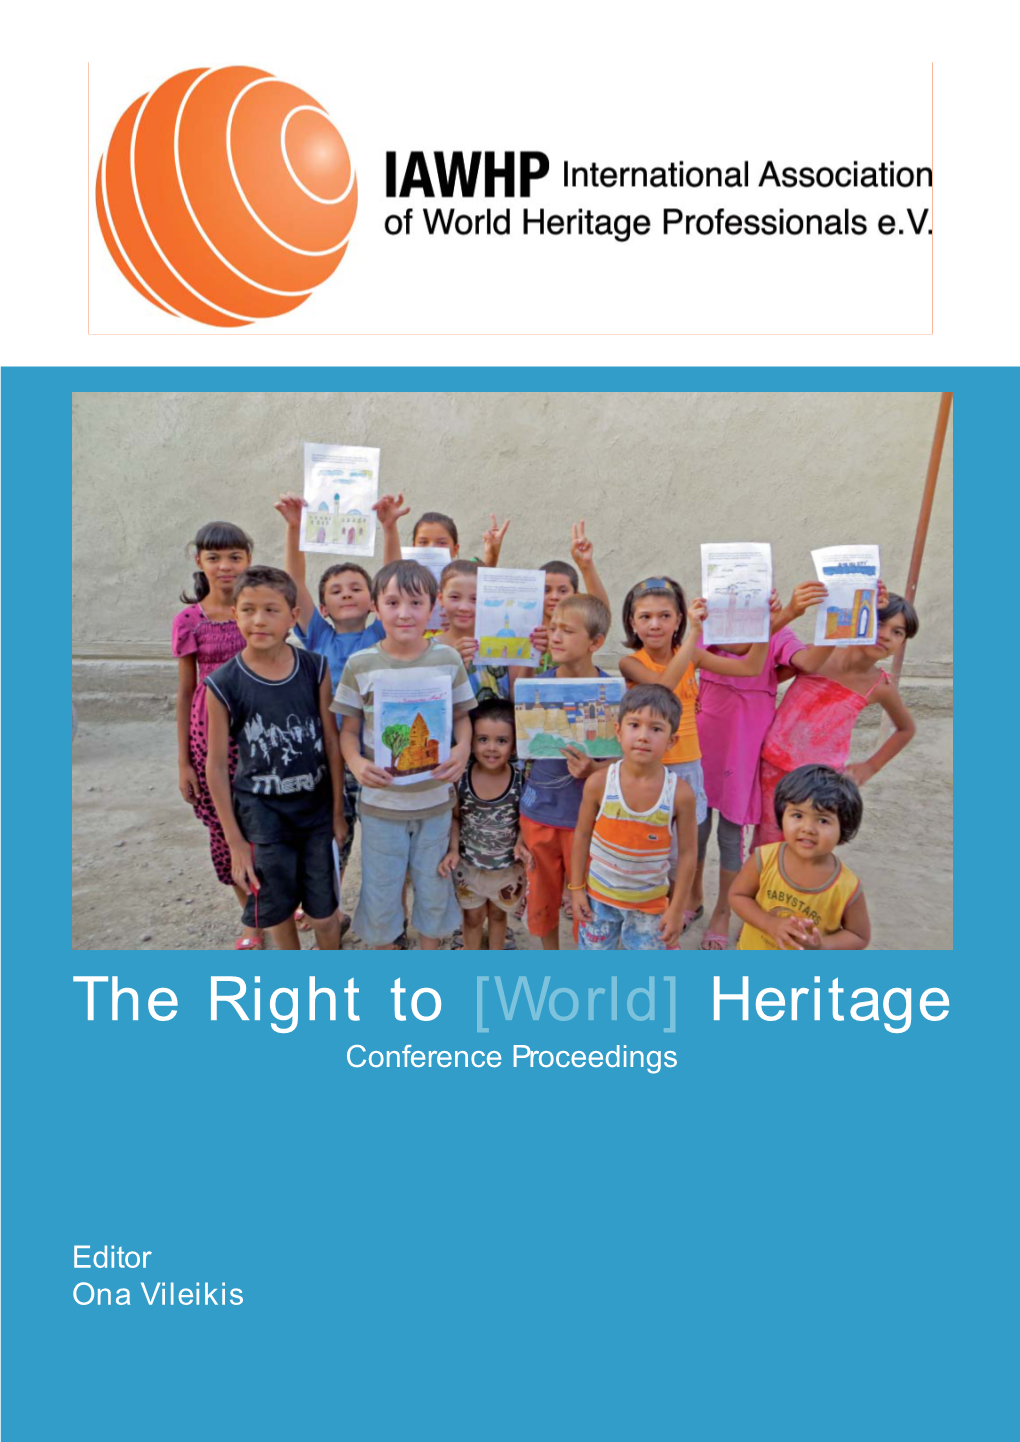 IAWHP2014 the Right to [World] Heritage Conference Proceedings